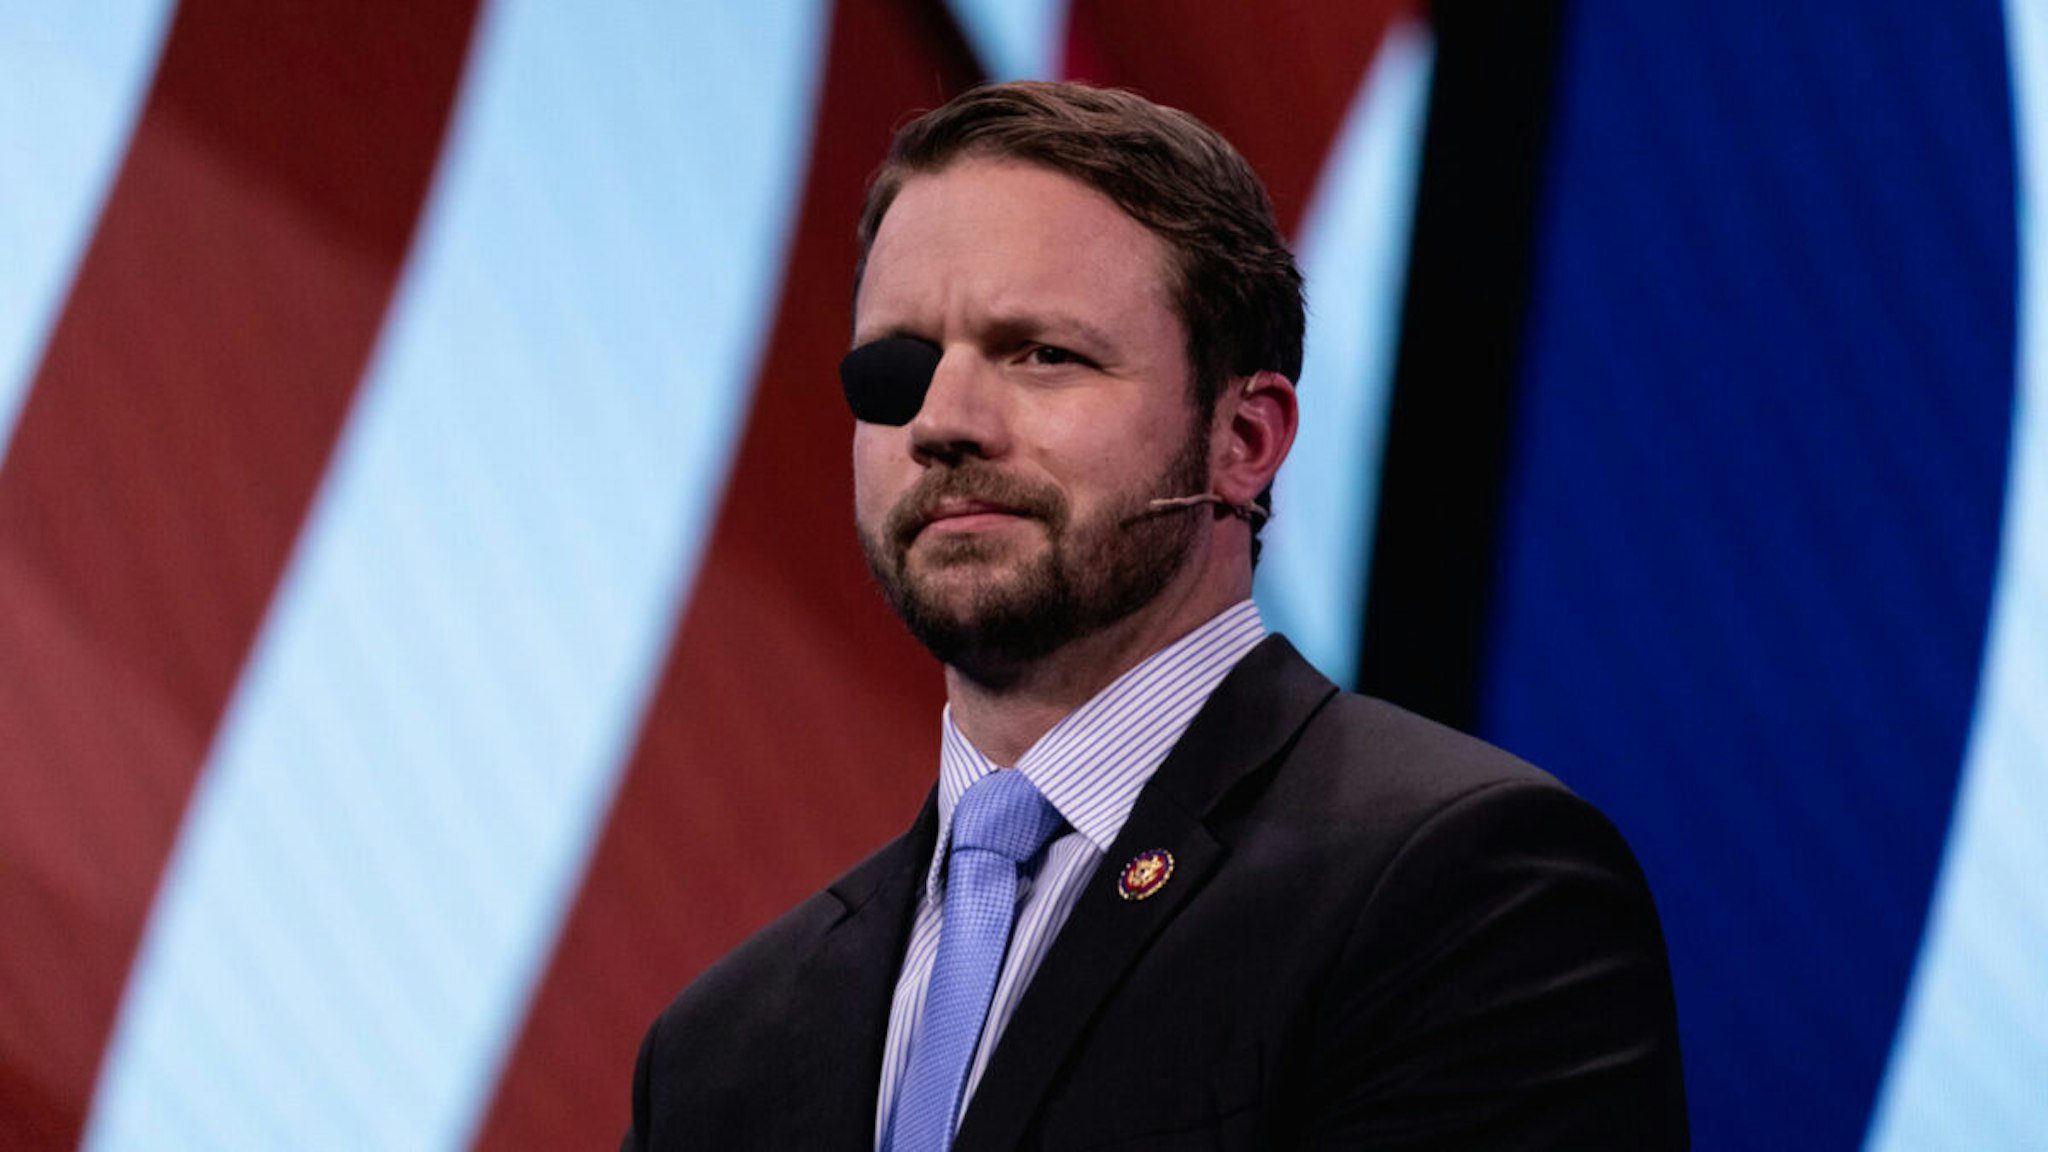 Rep. Dan Crenshaw (R-TX), speaks at the 2019 American Israel Public Affairs Committee (AIPAC) Policy Conference, at the Walter E. Washington Convention Center in Washington, D.C., on Monday, March 25, 2019.